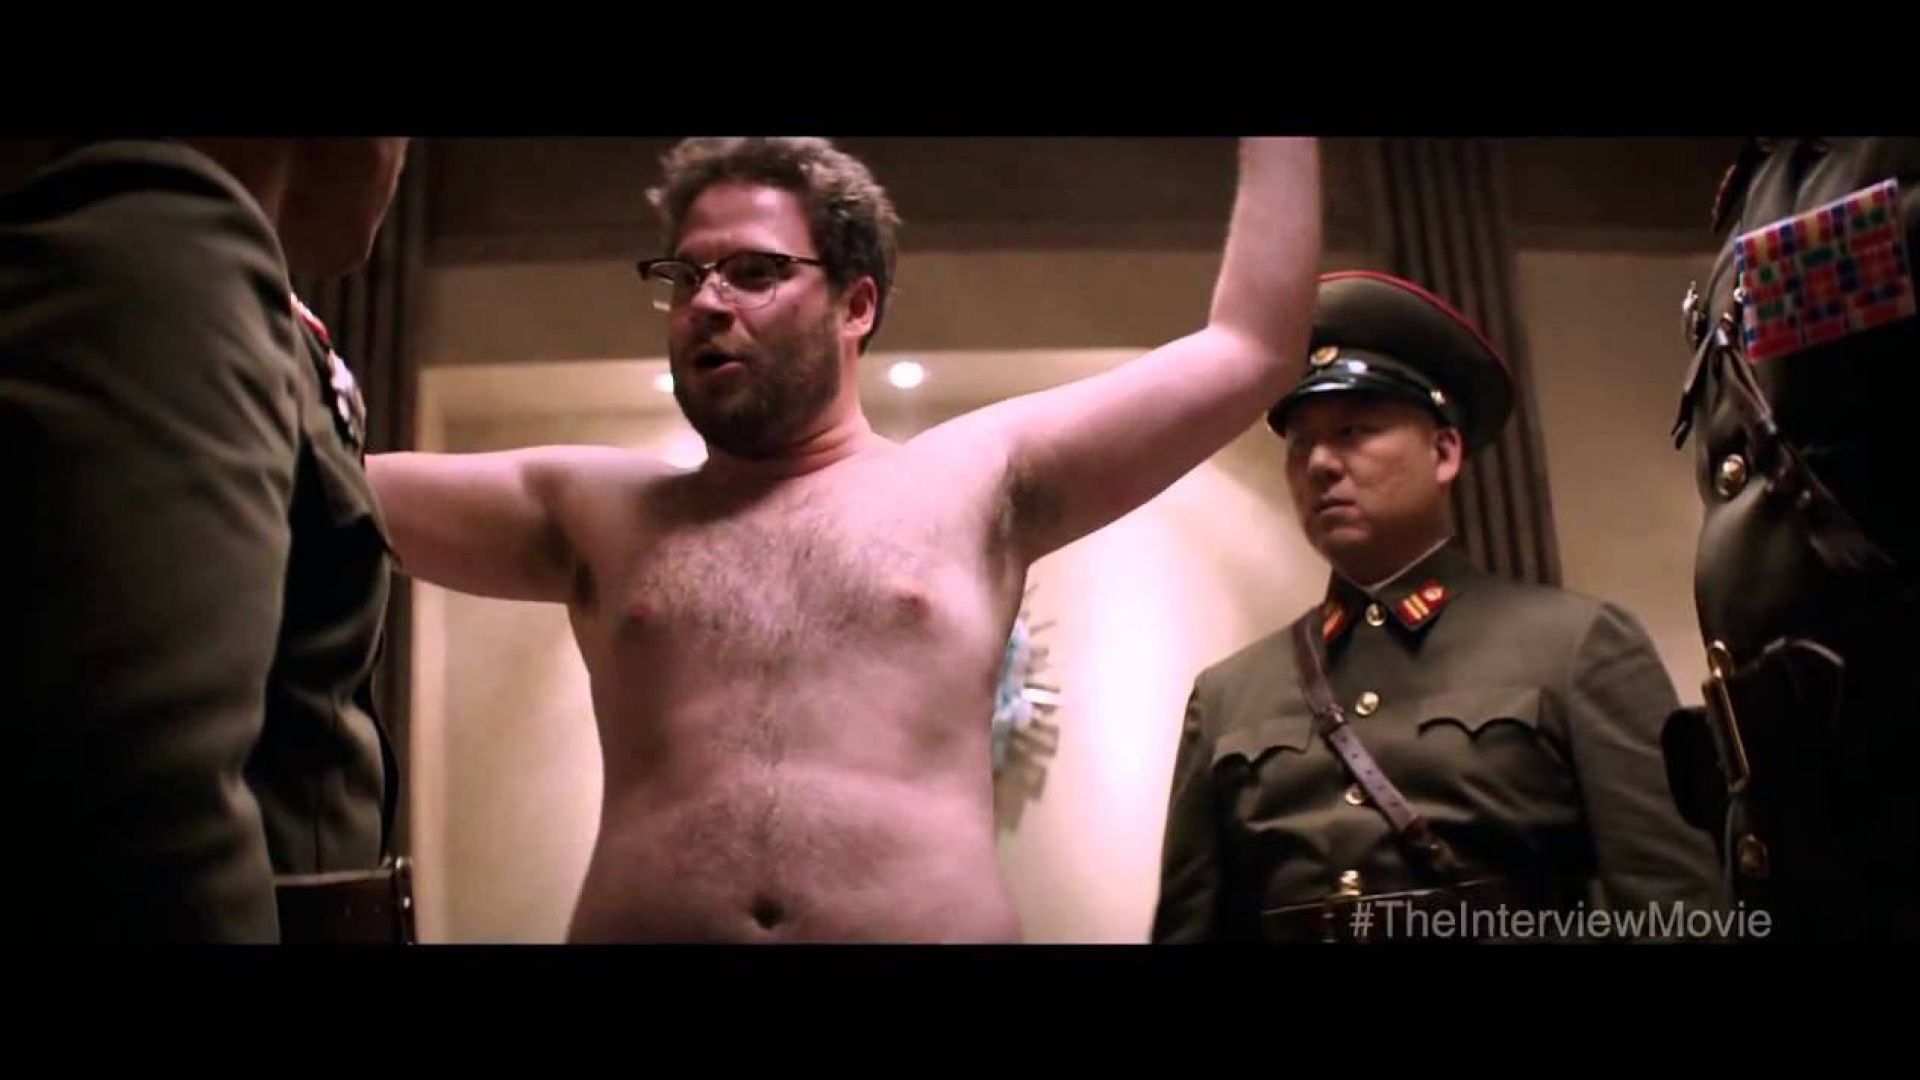 New TV Spot for &#039;The Interview&#039;